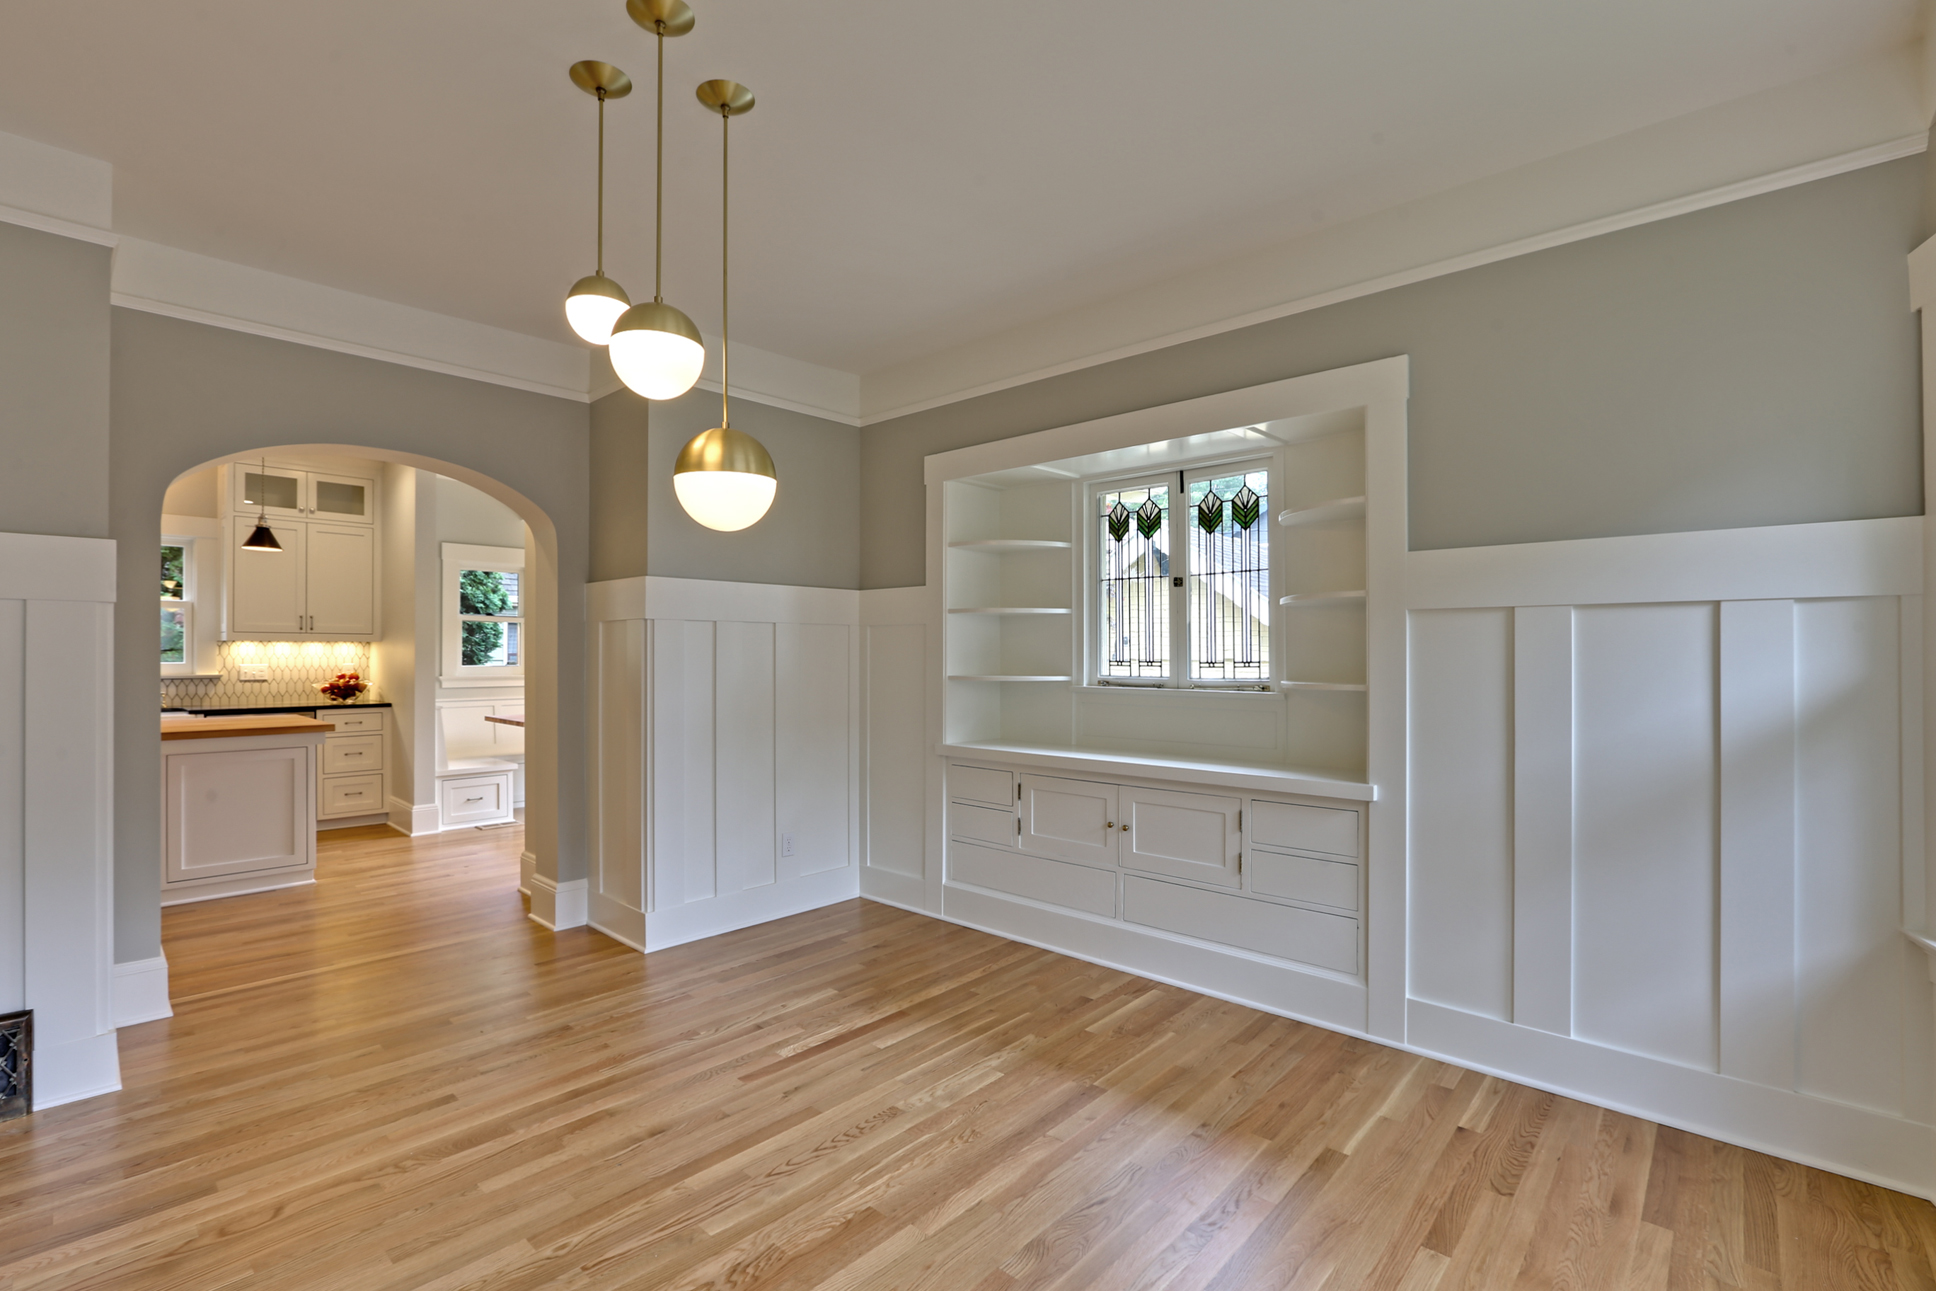  We redesigned the passageway from the dining room into the kitchen for better flow and to match the arches found elsewhere in the home. Fun light fixtures from Rejuvenation compliment the revitalized original cabinets and wainscoting; blending old a